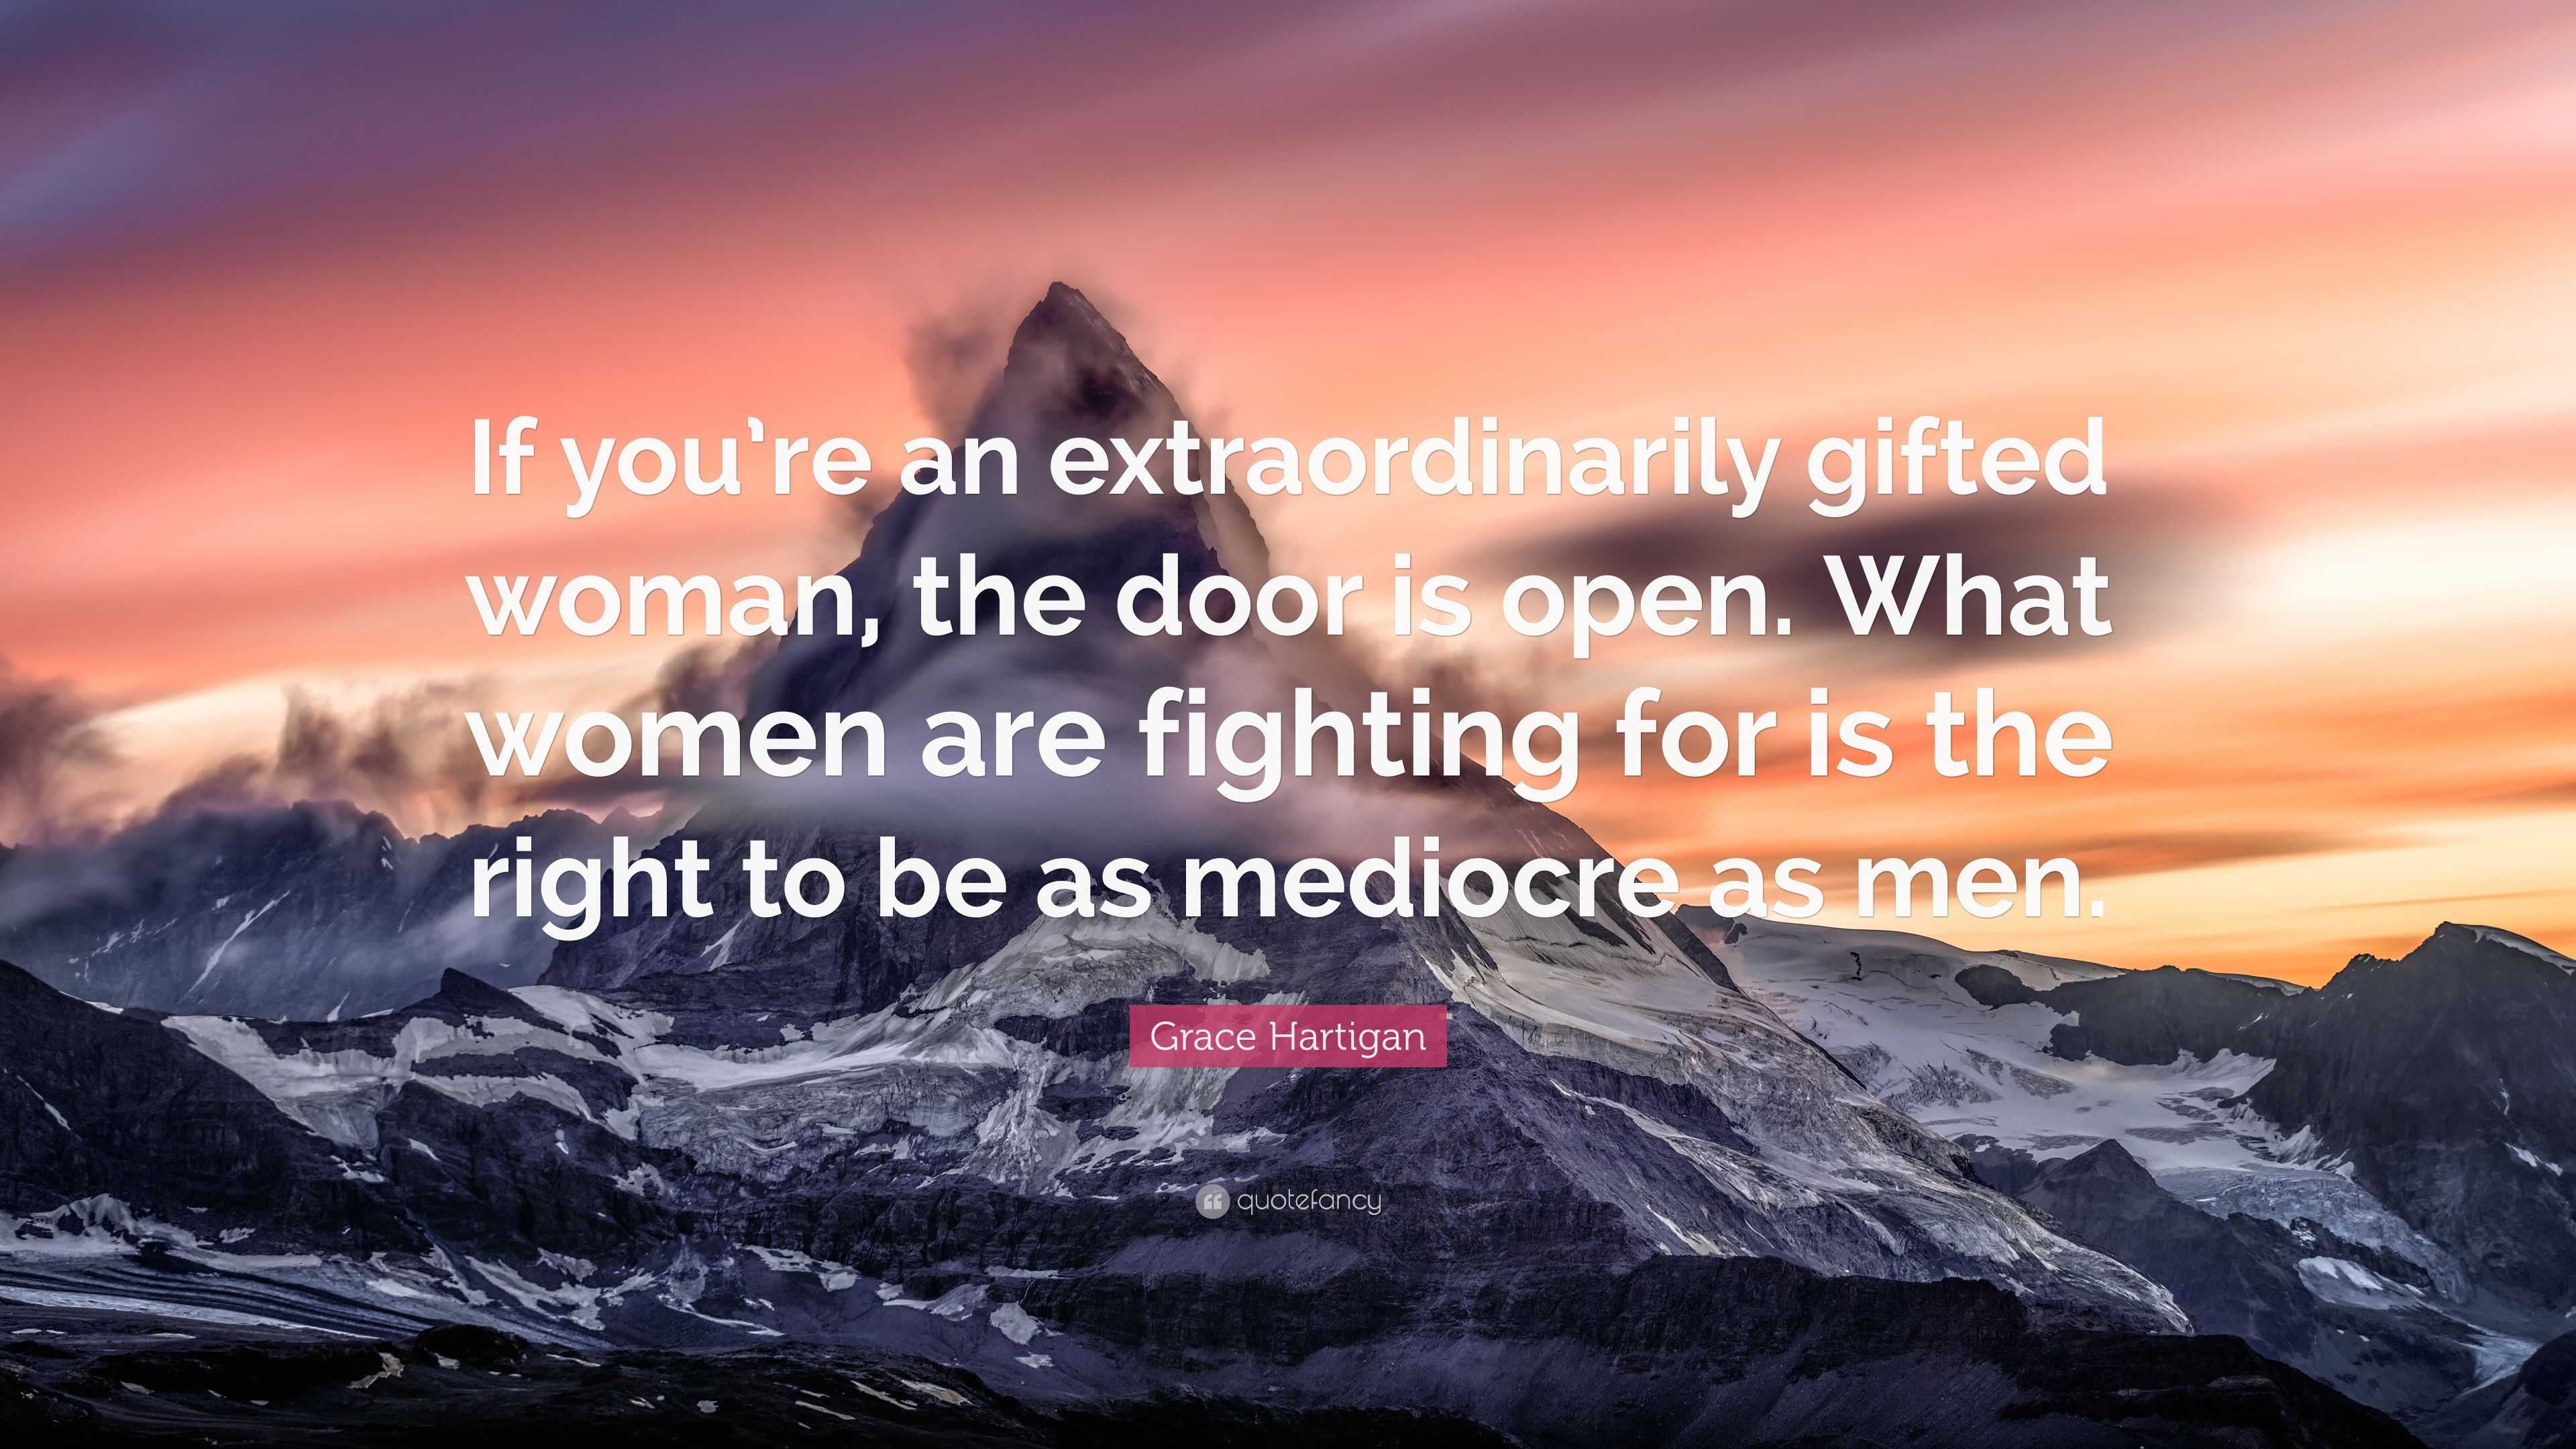 Grace Hartigan Quote: “If you’re an extraordinarily gifted woman, the ...